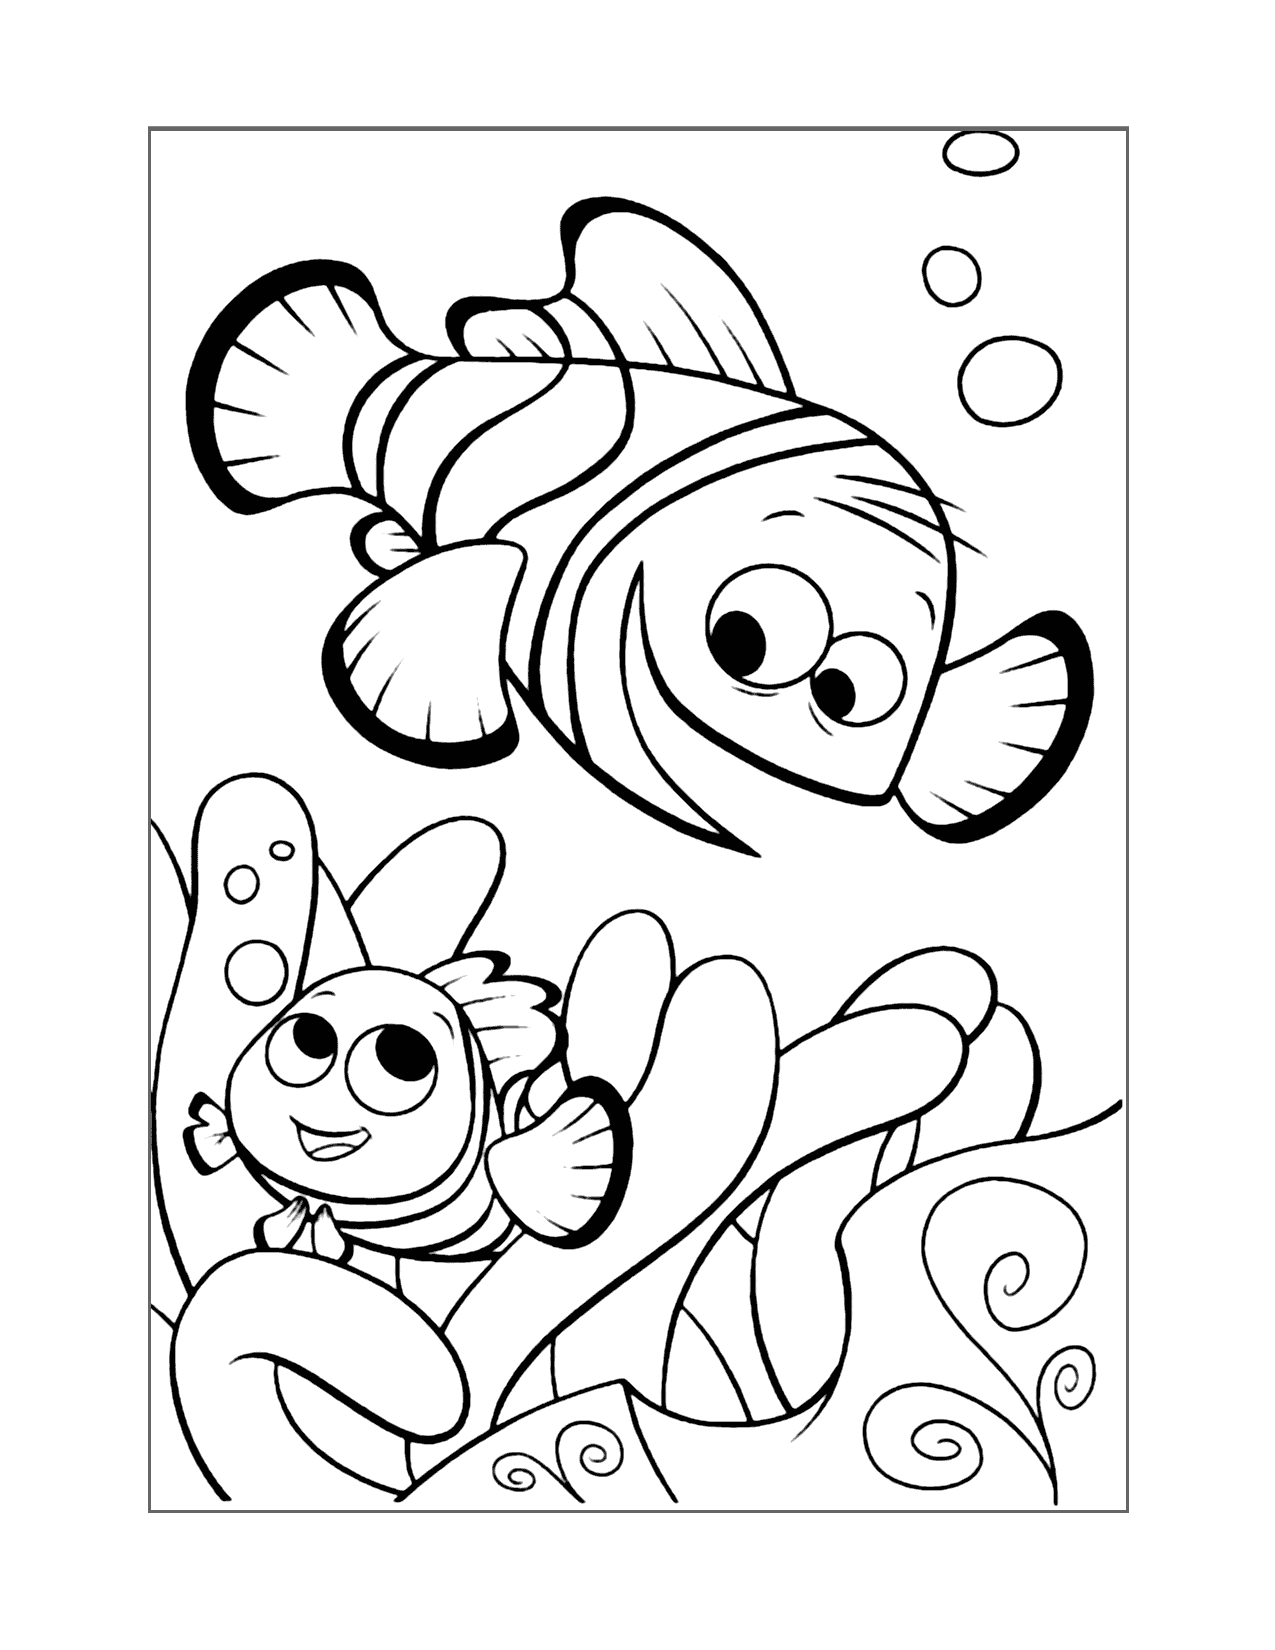 Marlin And Nemo Coloring Page